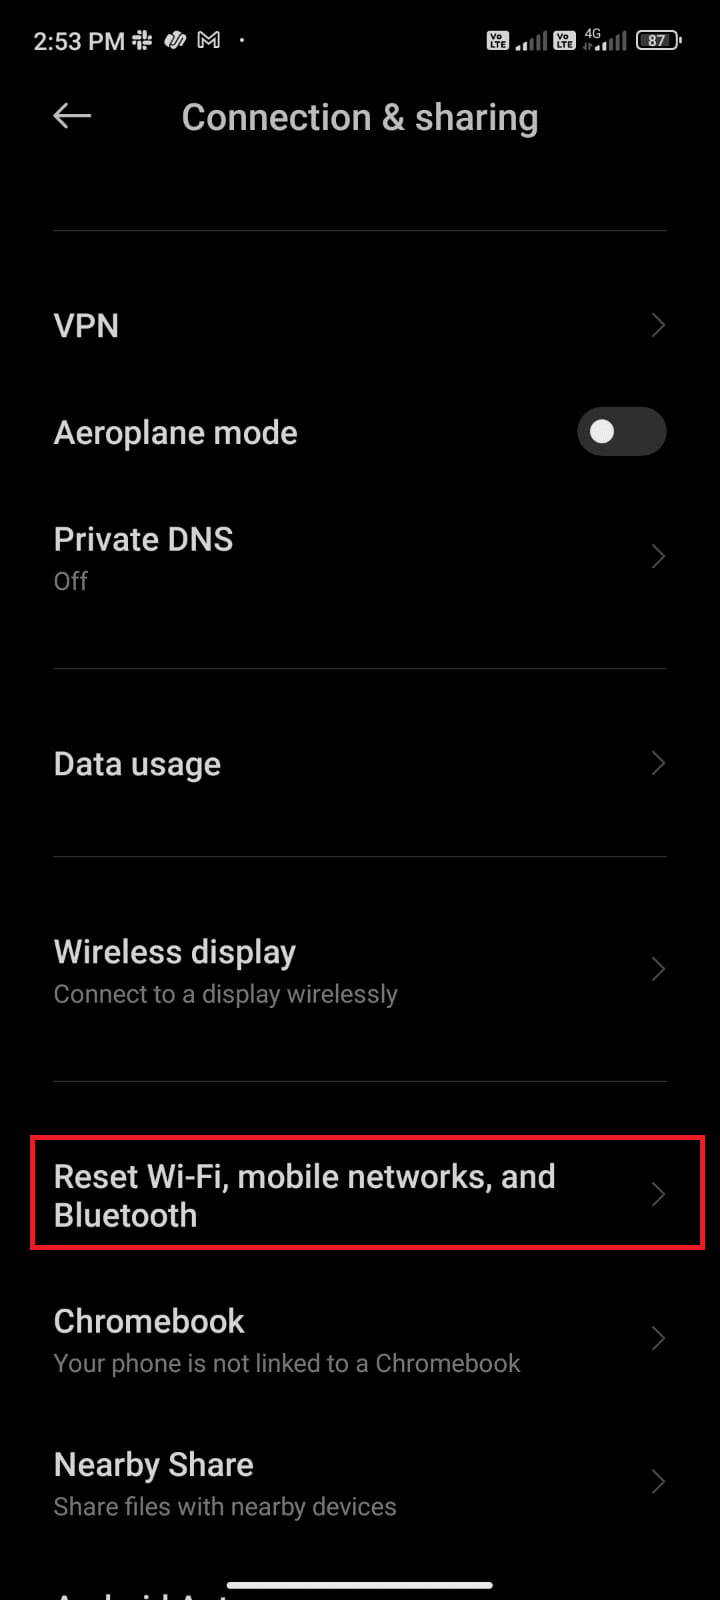 tap on Reset WiFi mobile networks and Bluetooth